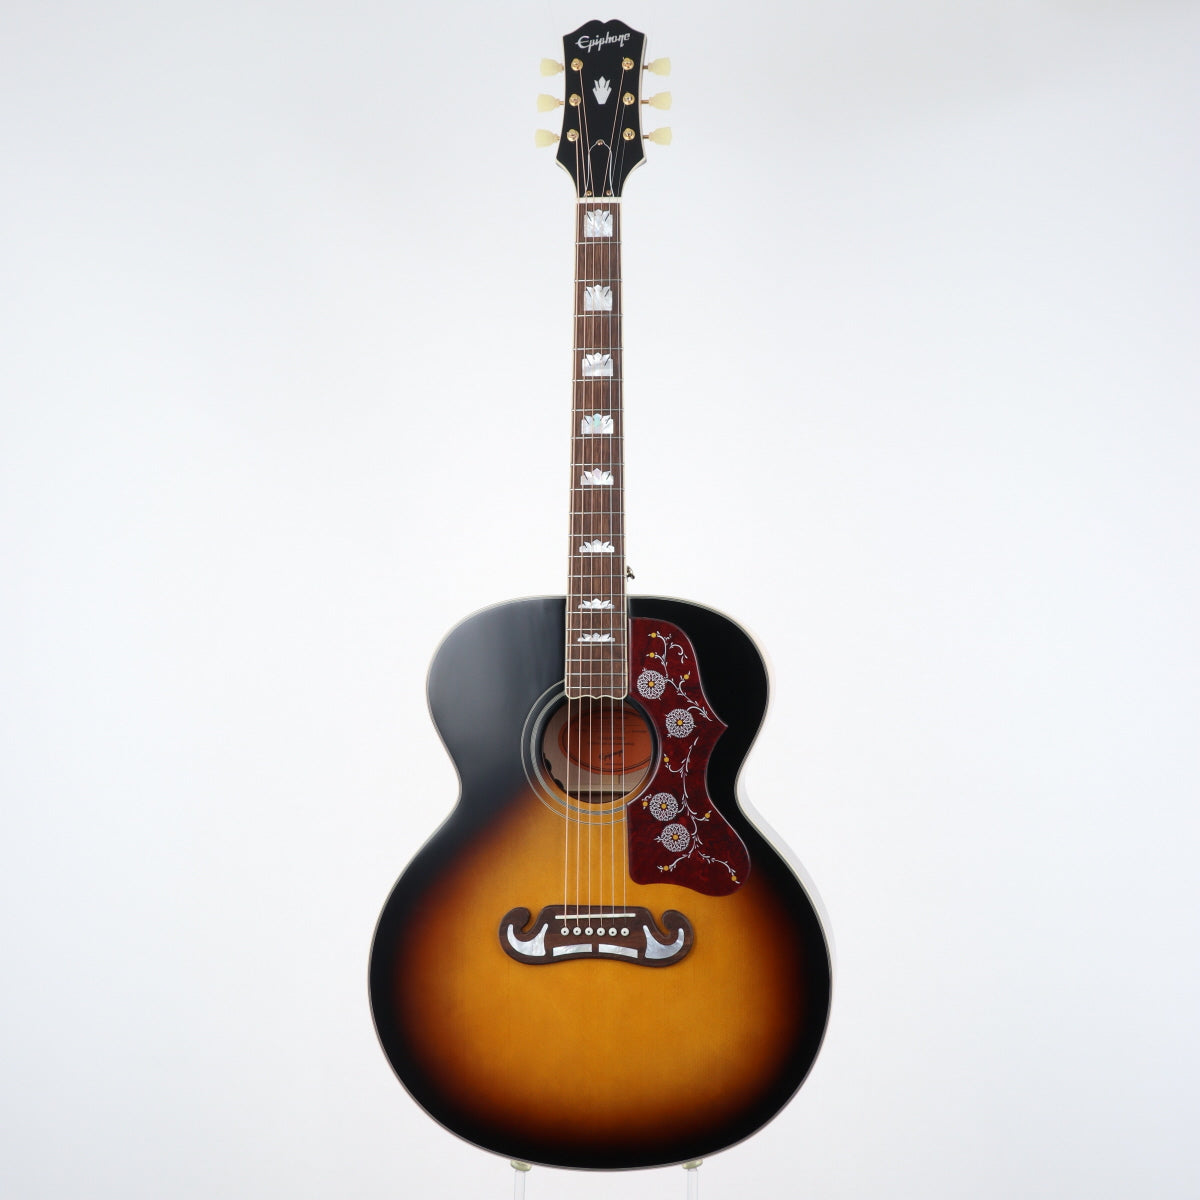 [SN 21082312988] USED Epiphone / Masterbilt Inspired by Gibson J-200 [12]